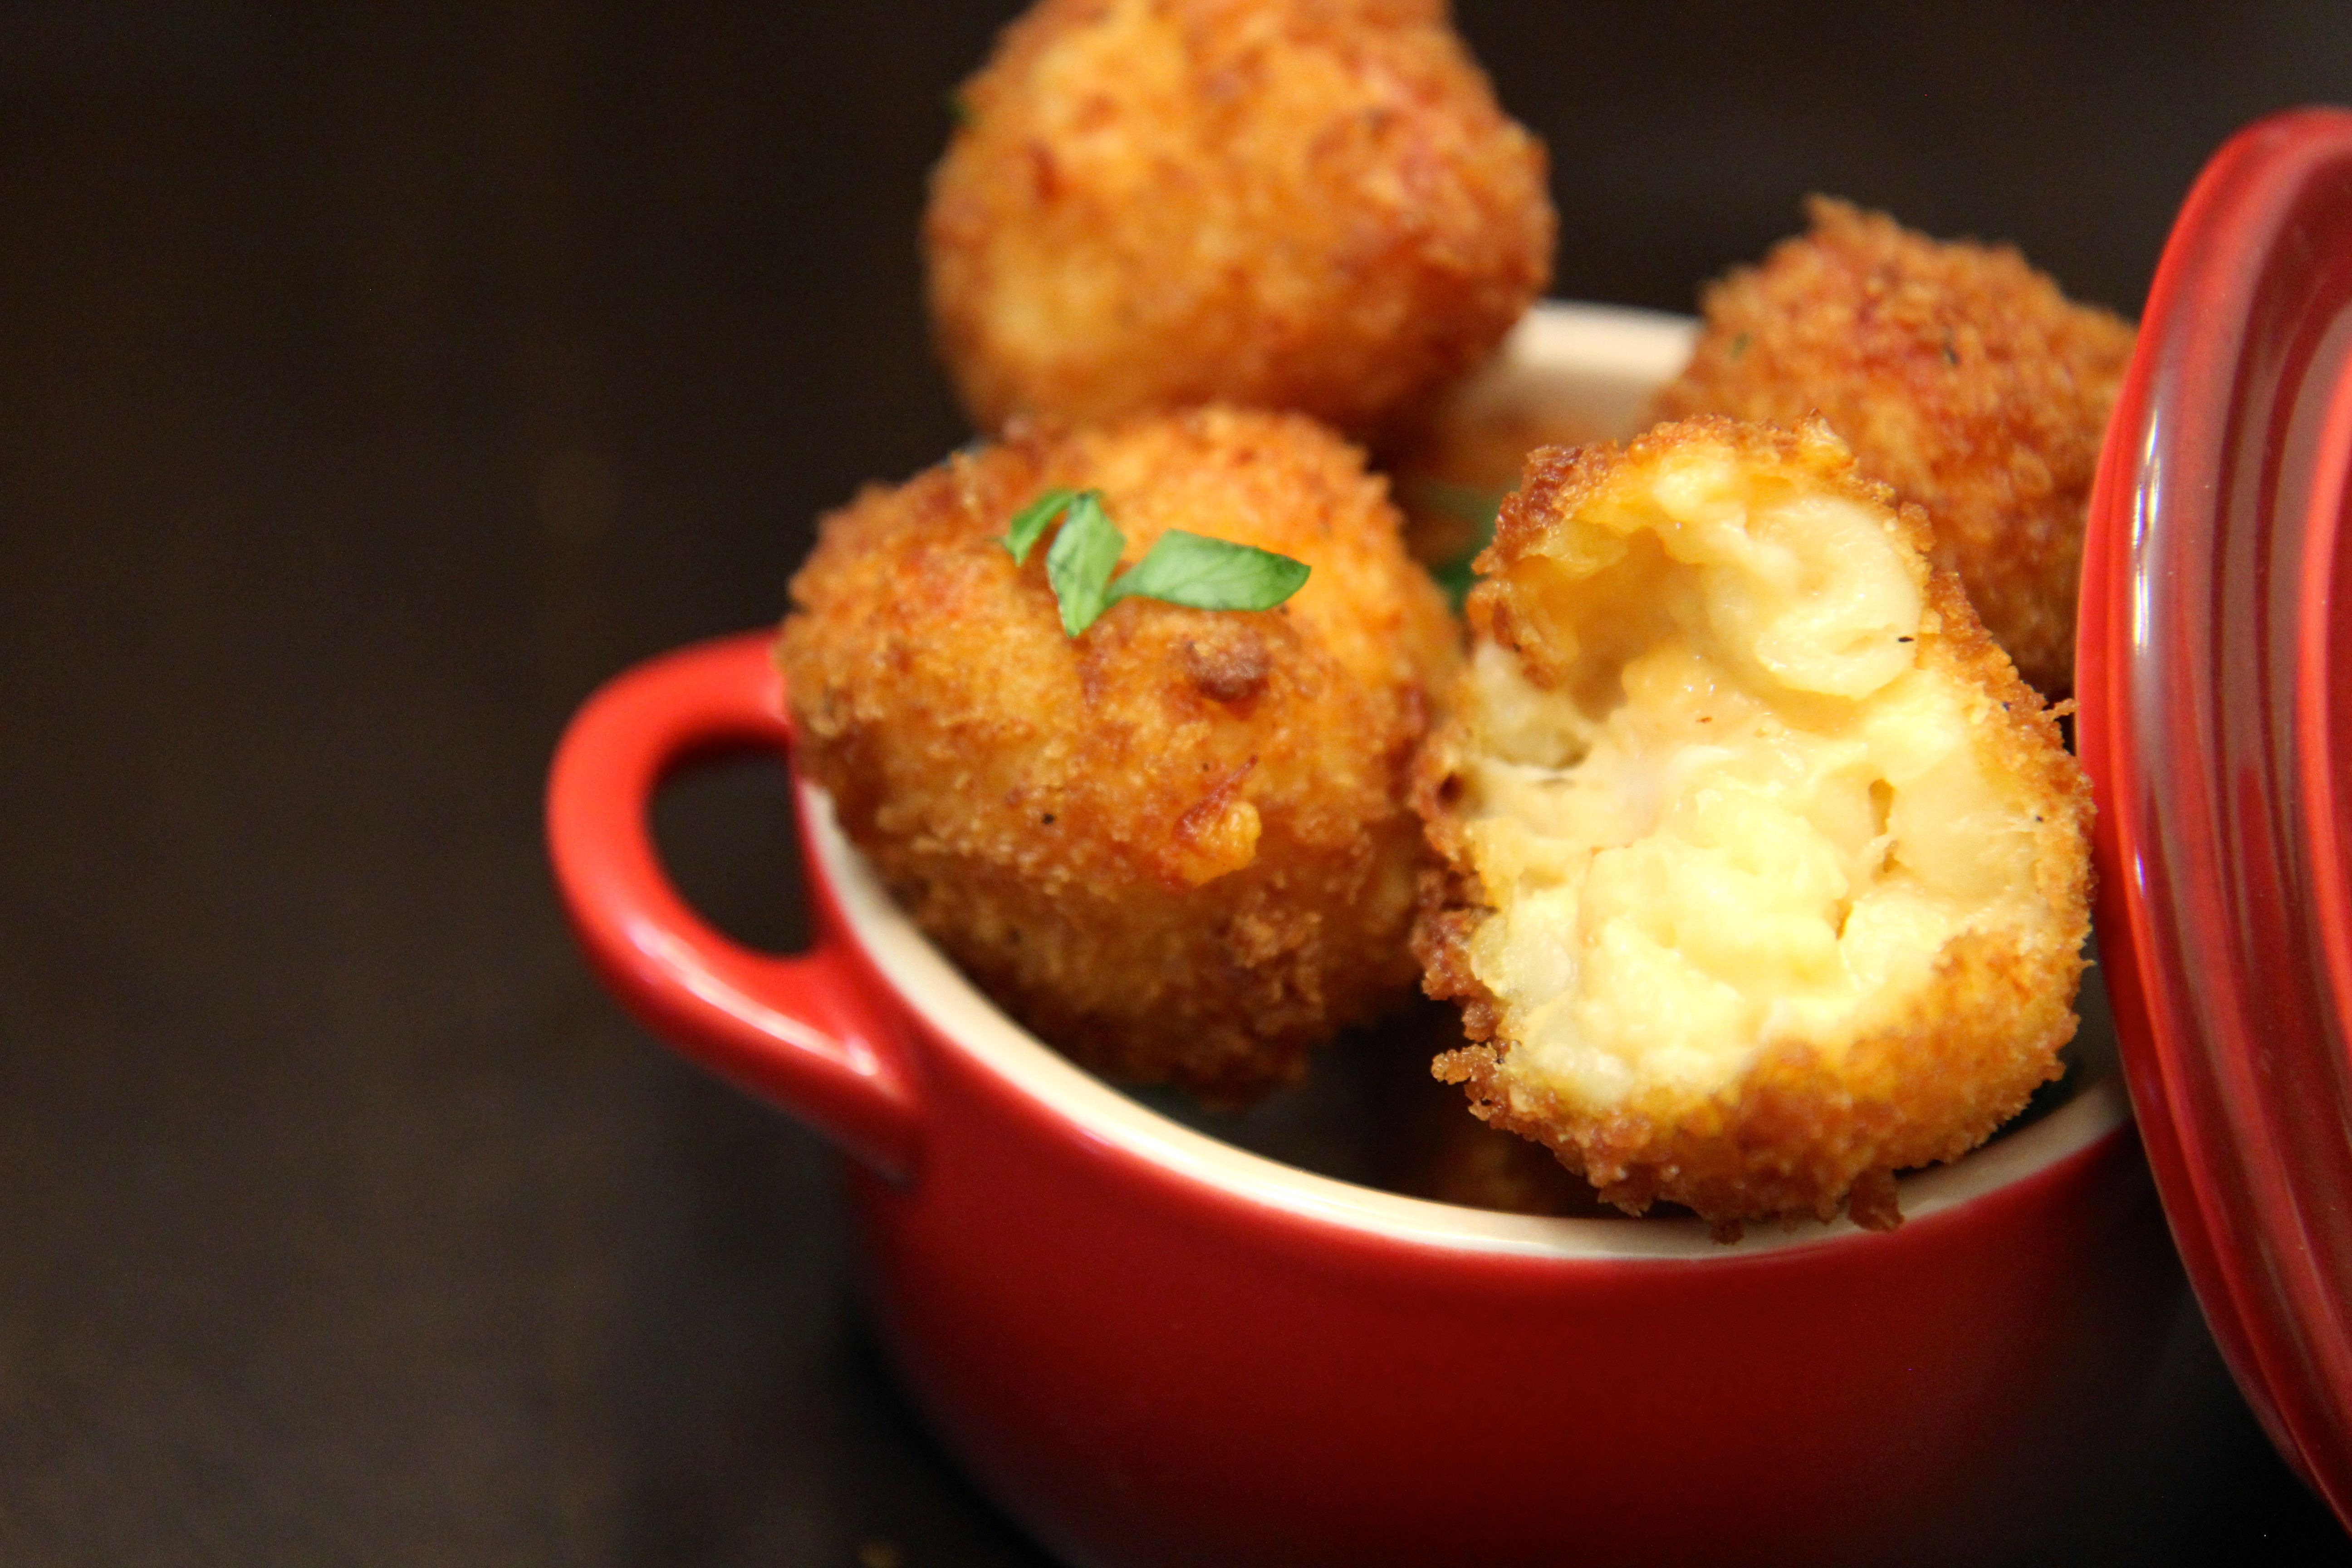 fried mac and cheese balls